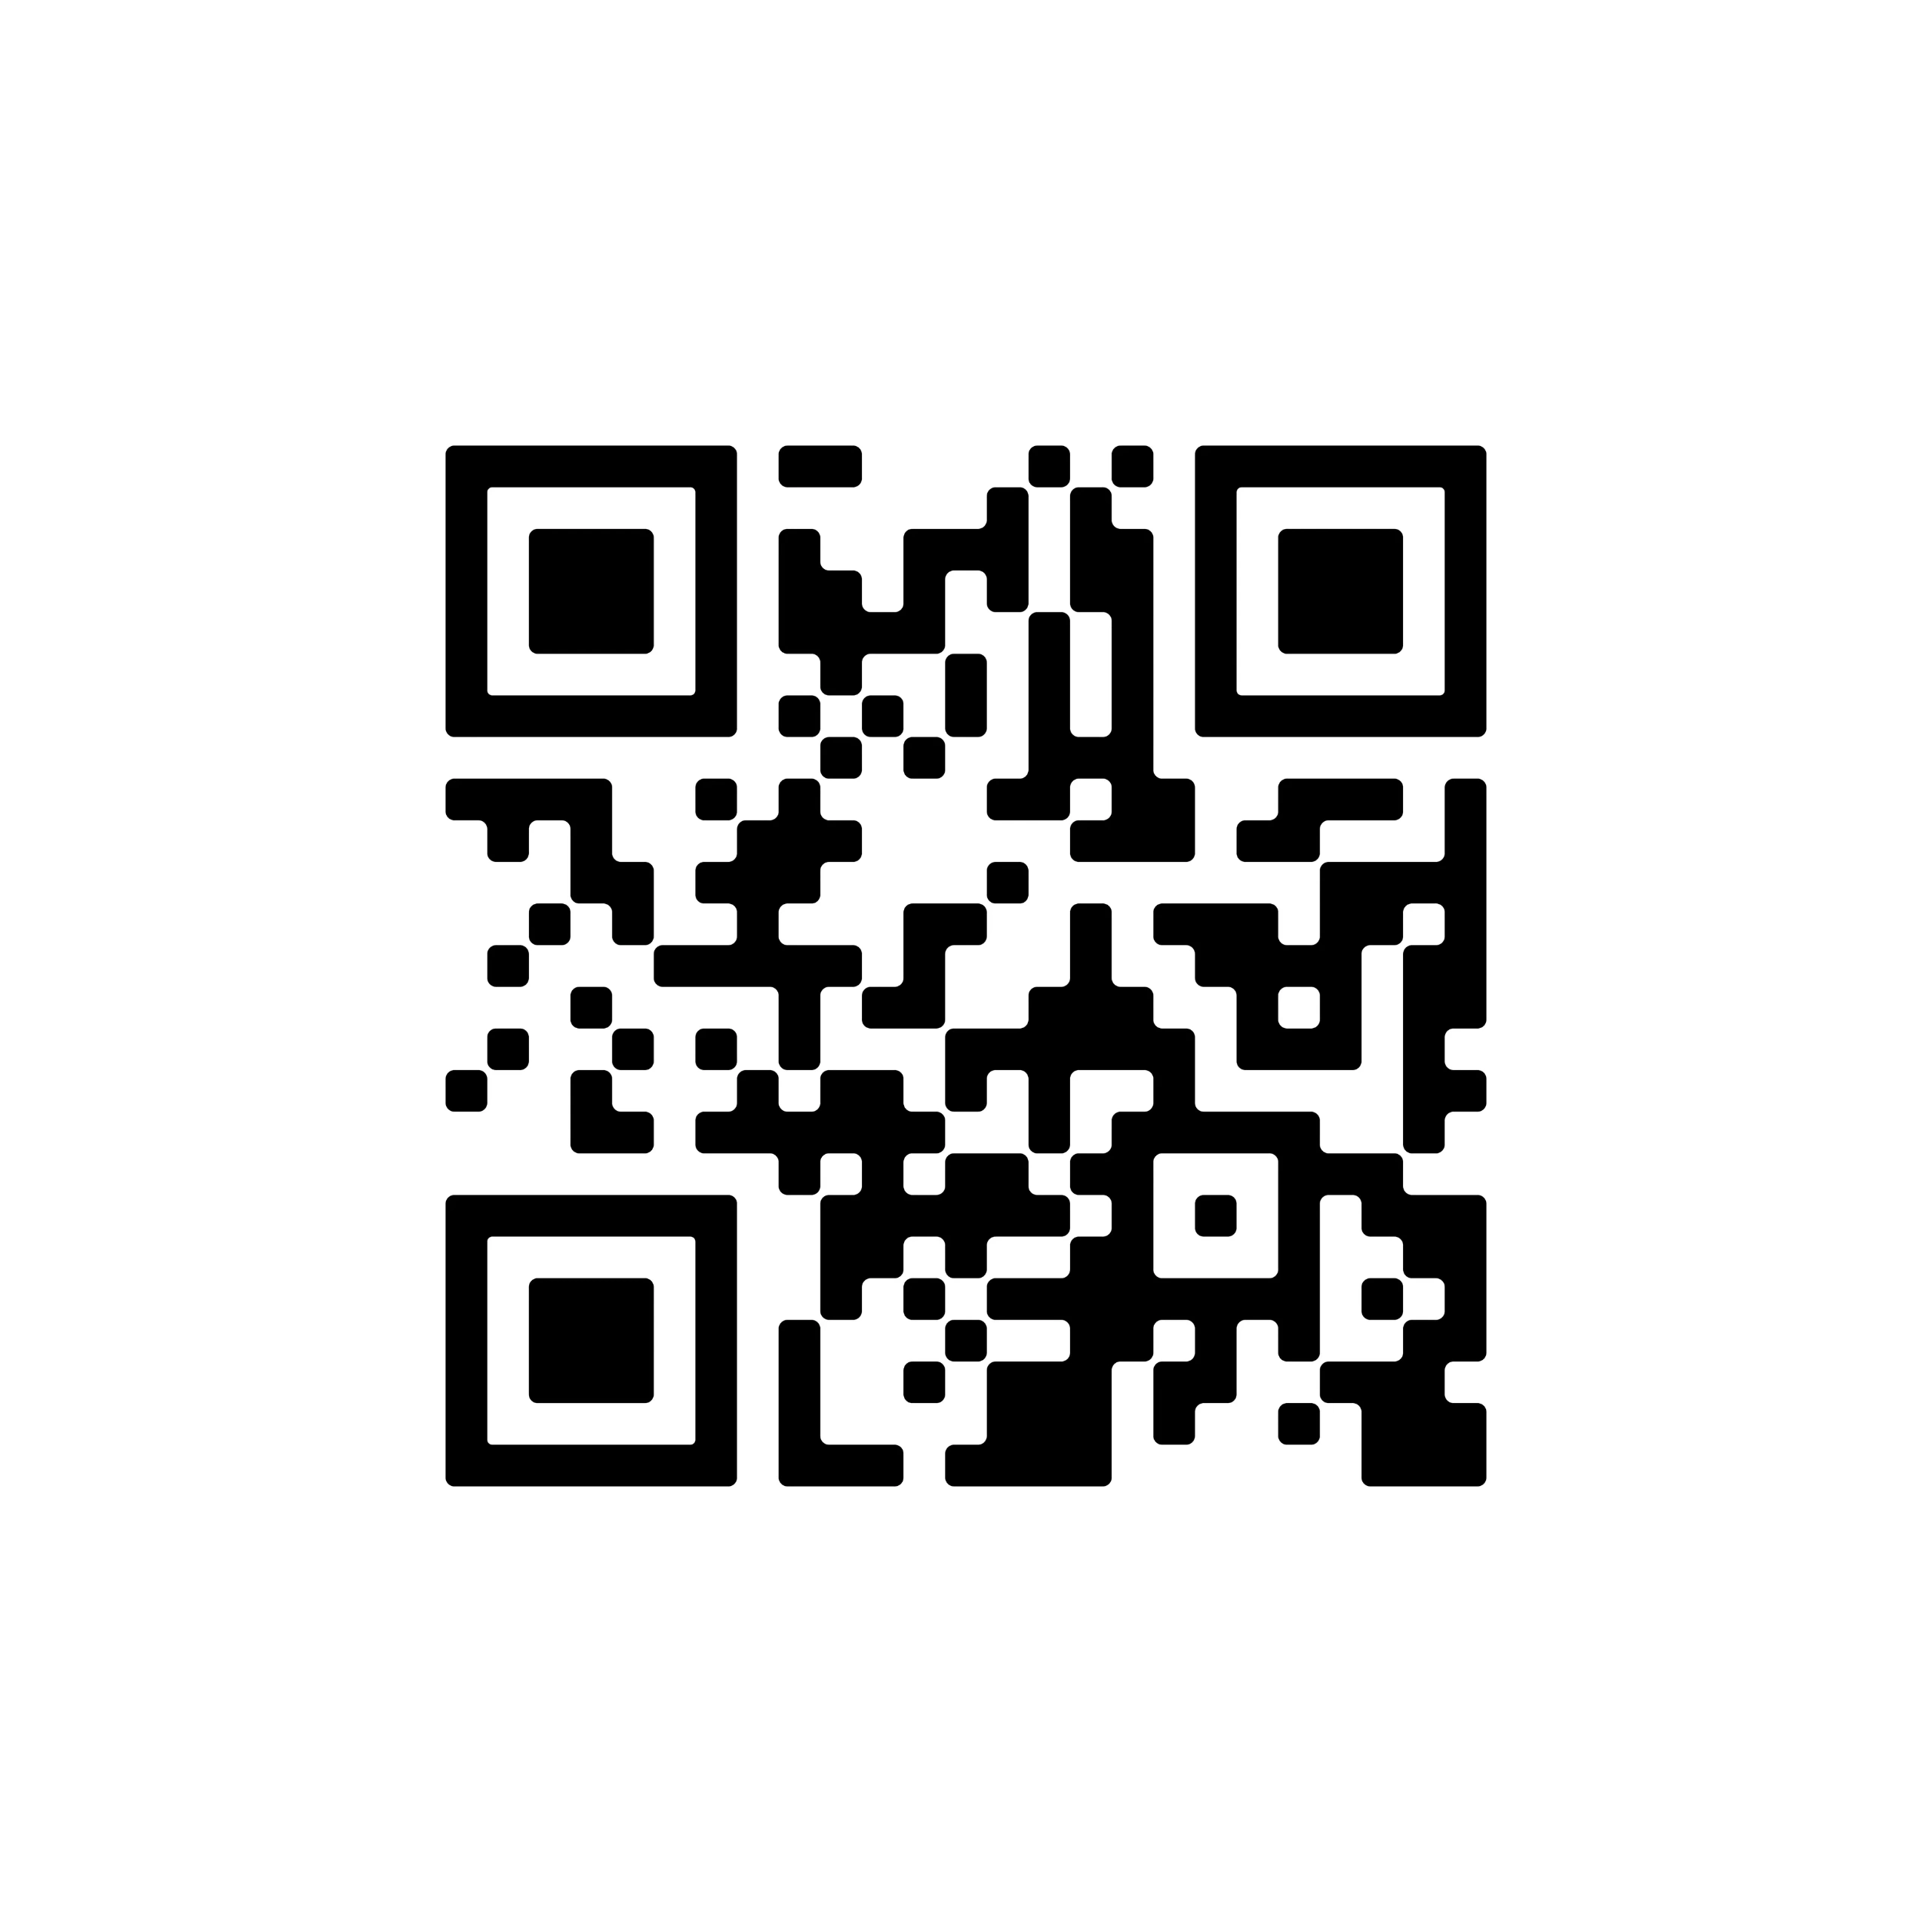 scan the qr code